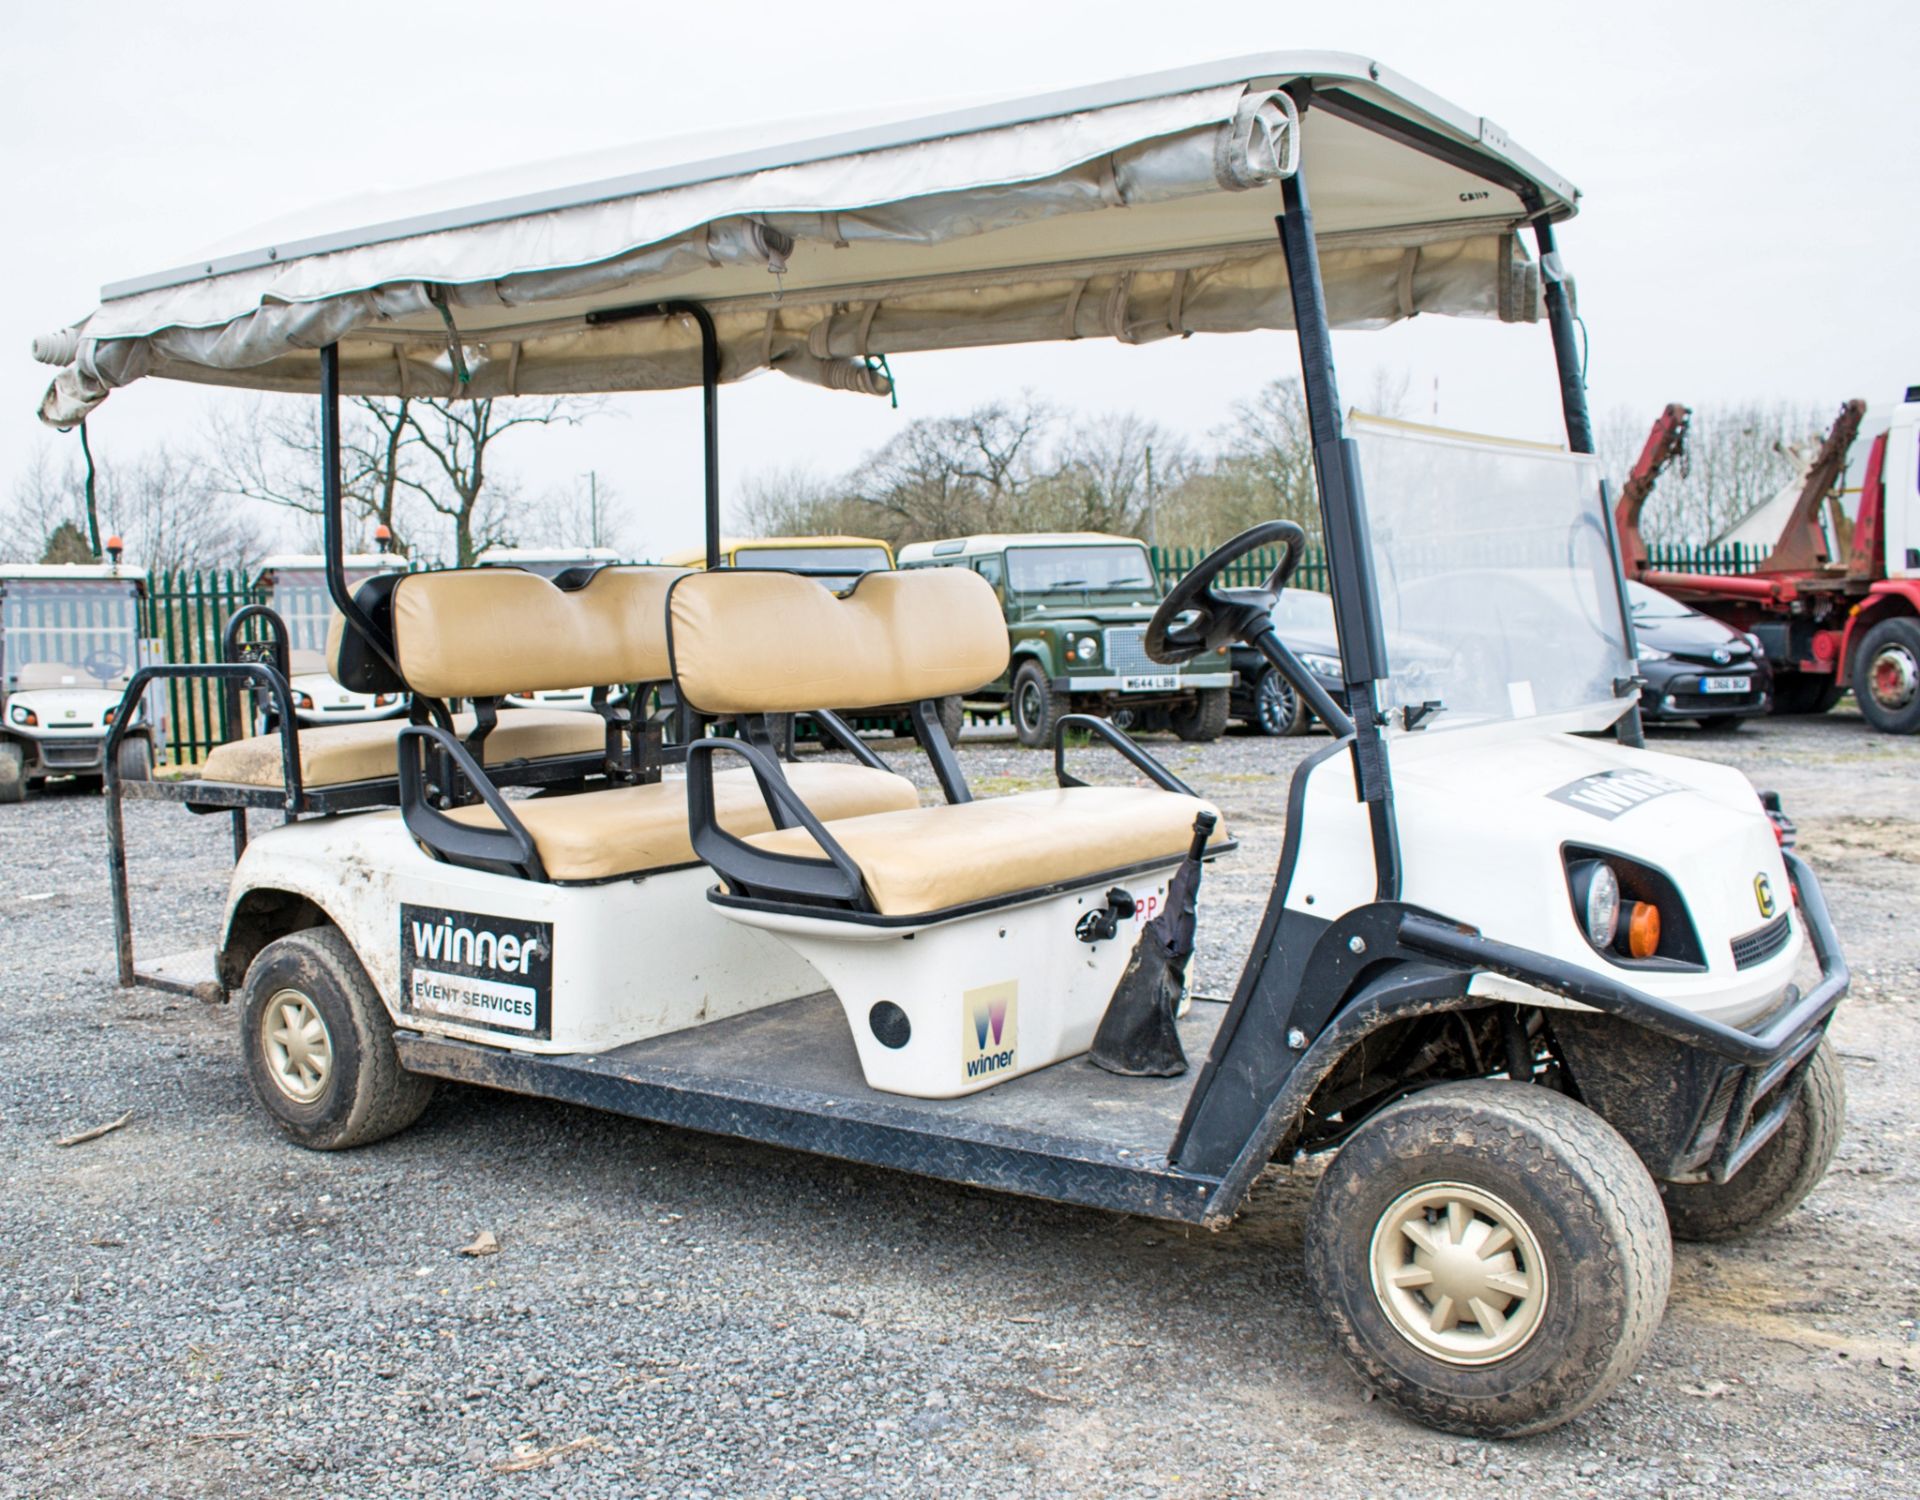 Cushman 6 seat petrol driven golf buggy Year: 2012 S/N: 281245 Recorded Hours: 0184 - Image 2 of 8